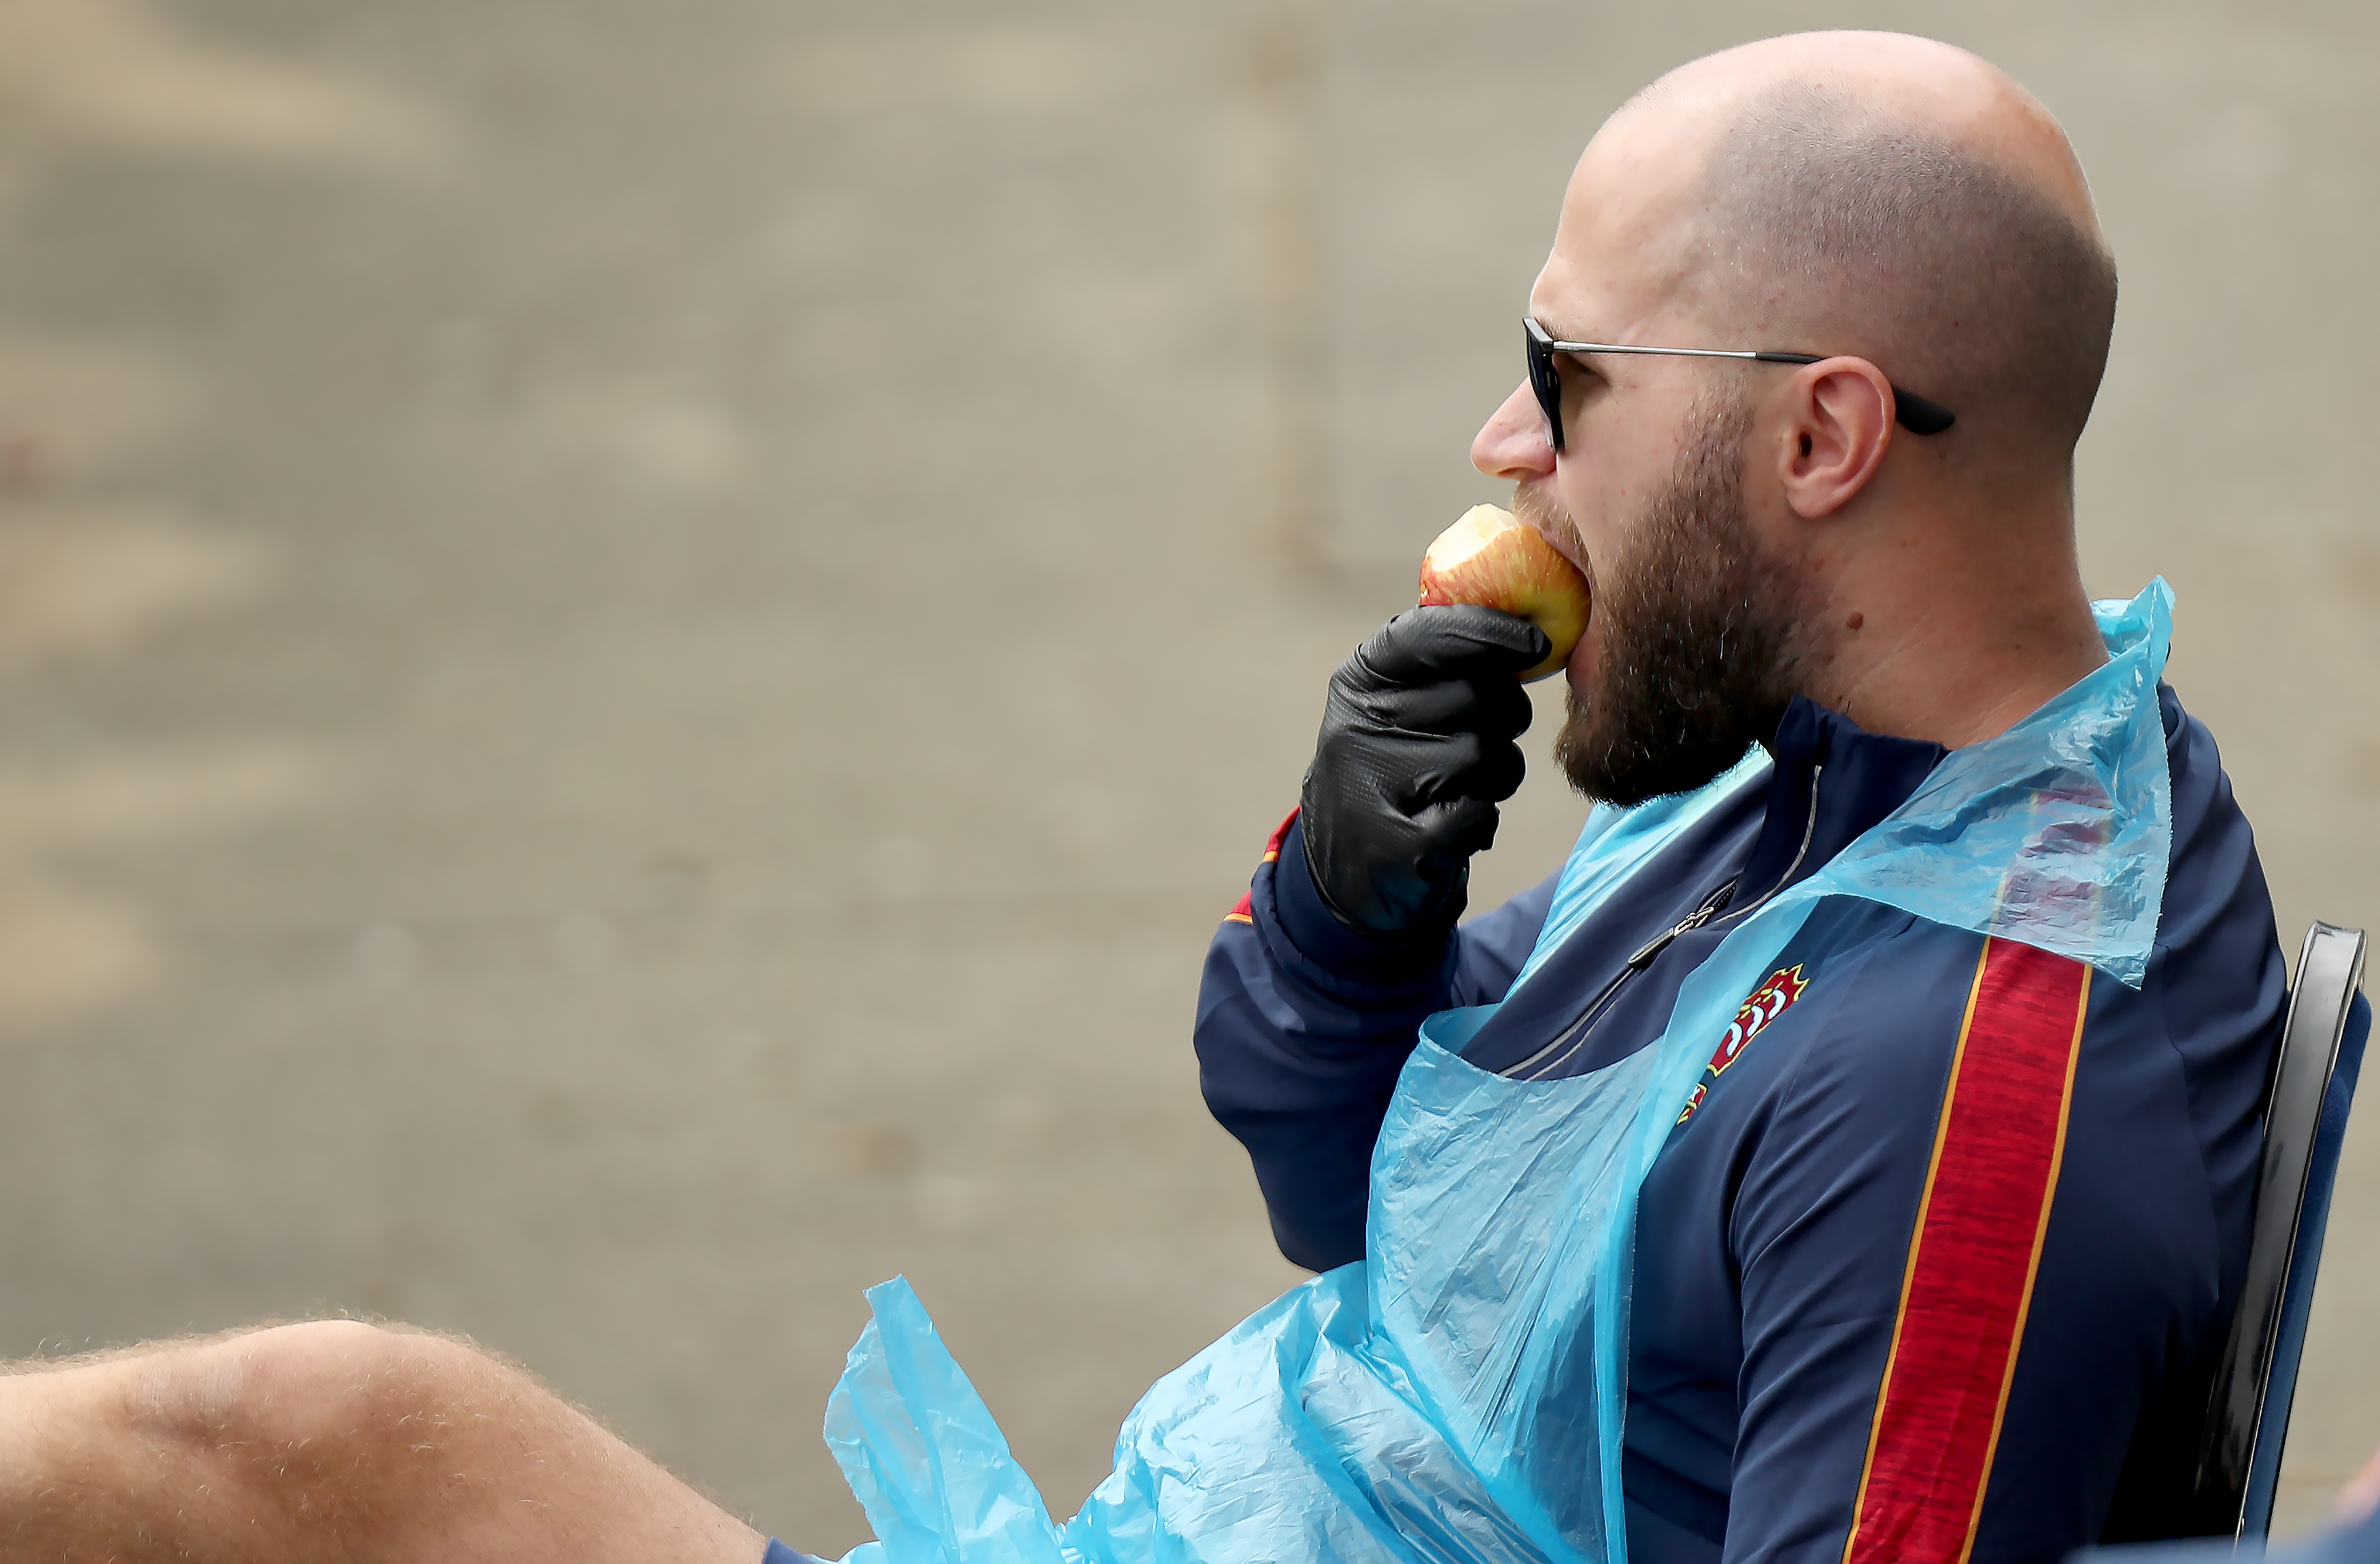 Full PPE for Essex Lead Physiotherapist Chris Clarke-irons whilst apple munching during Essex vs Middlesex in the Bob Willis Trophy at The Cloudfm County Ground on 7 September.